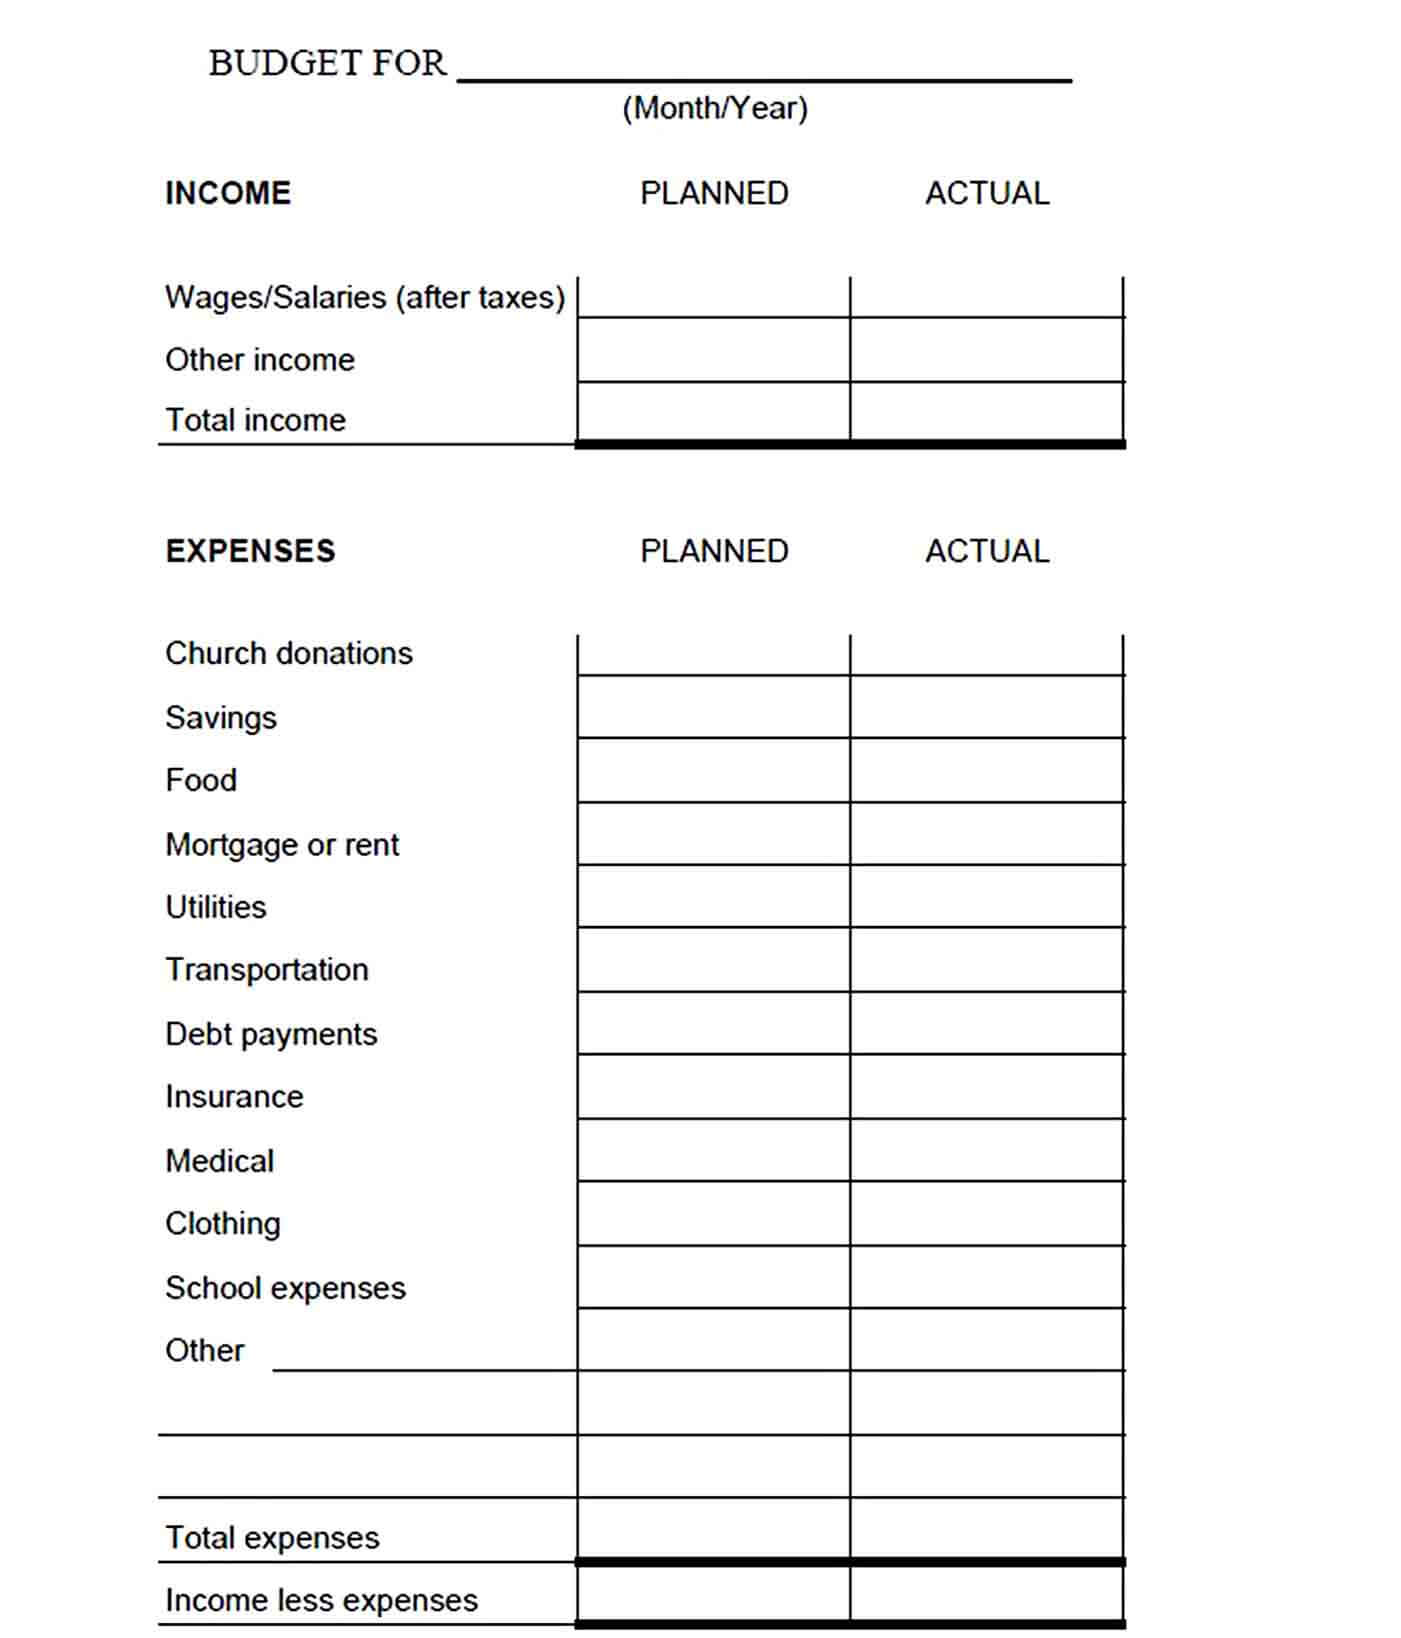 Family Budget Worksheet Template in PDF 1